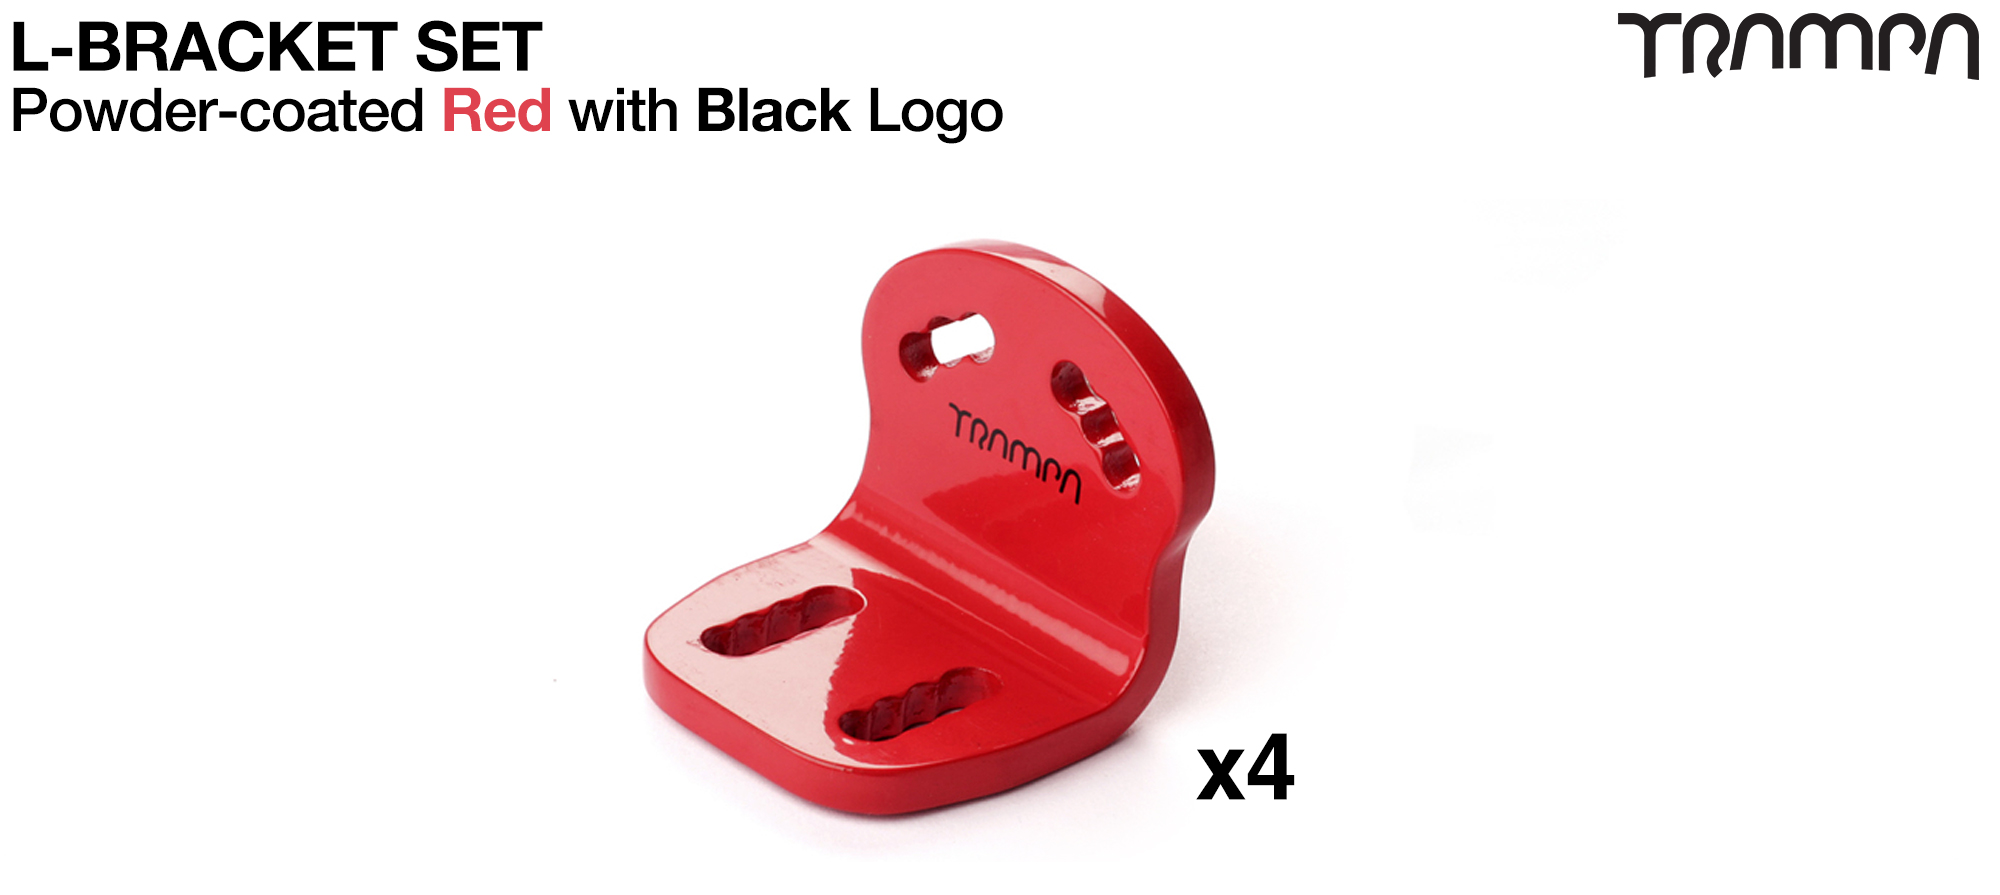 RED Powder-Coated with BLACK logo L-Brackets 